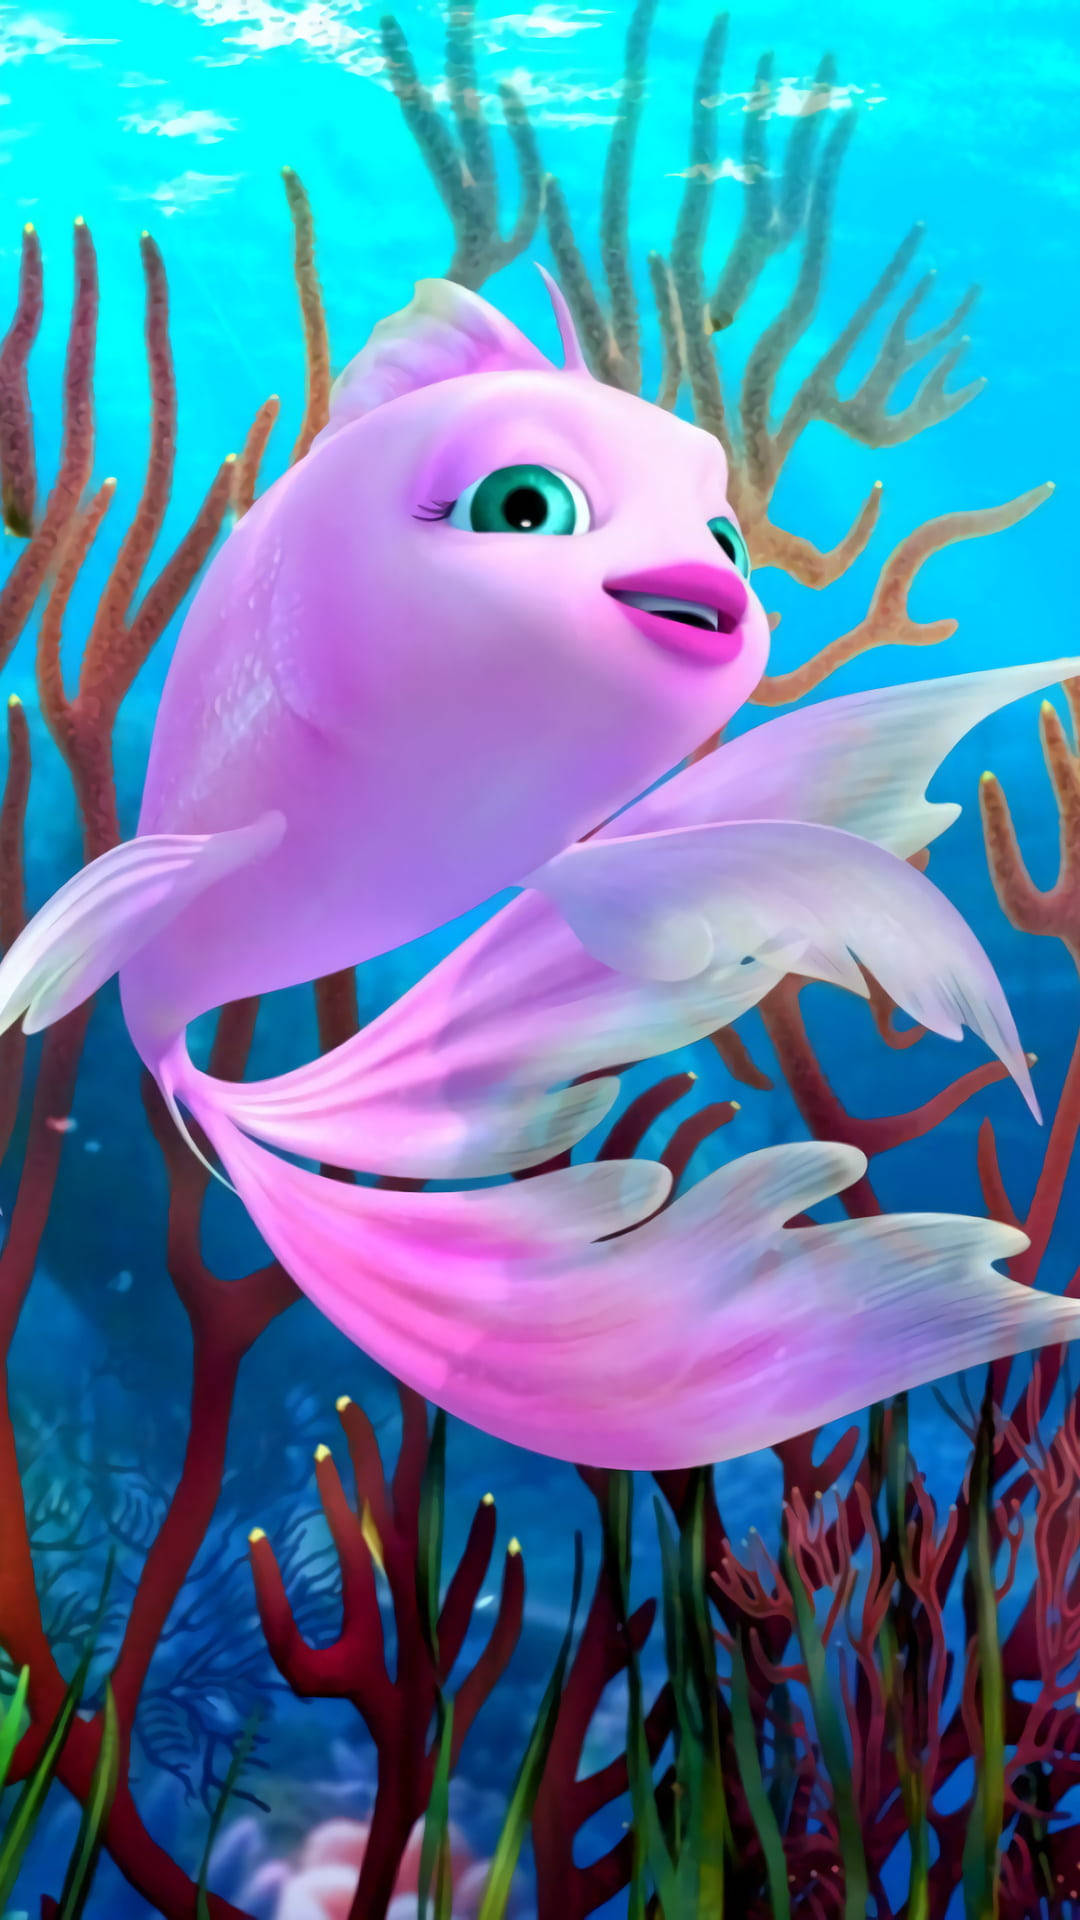 Lexica - An iphone wallpaper of fish underwater in the ocean